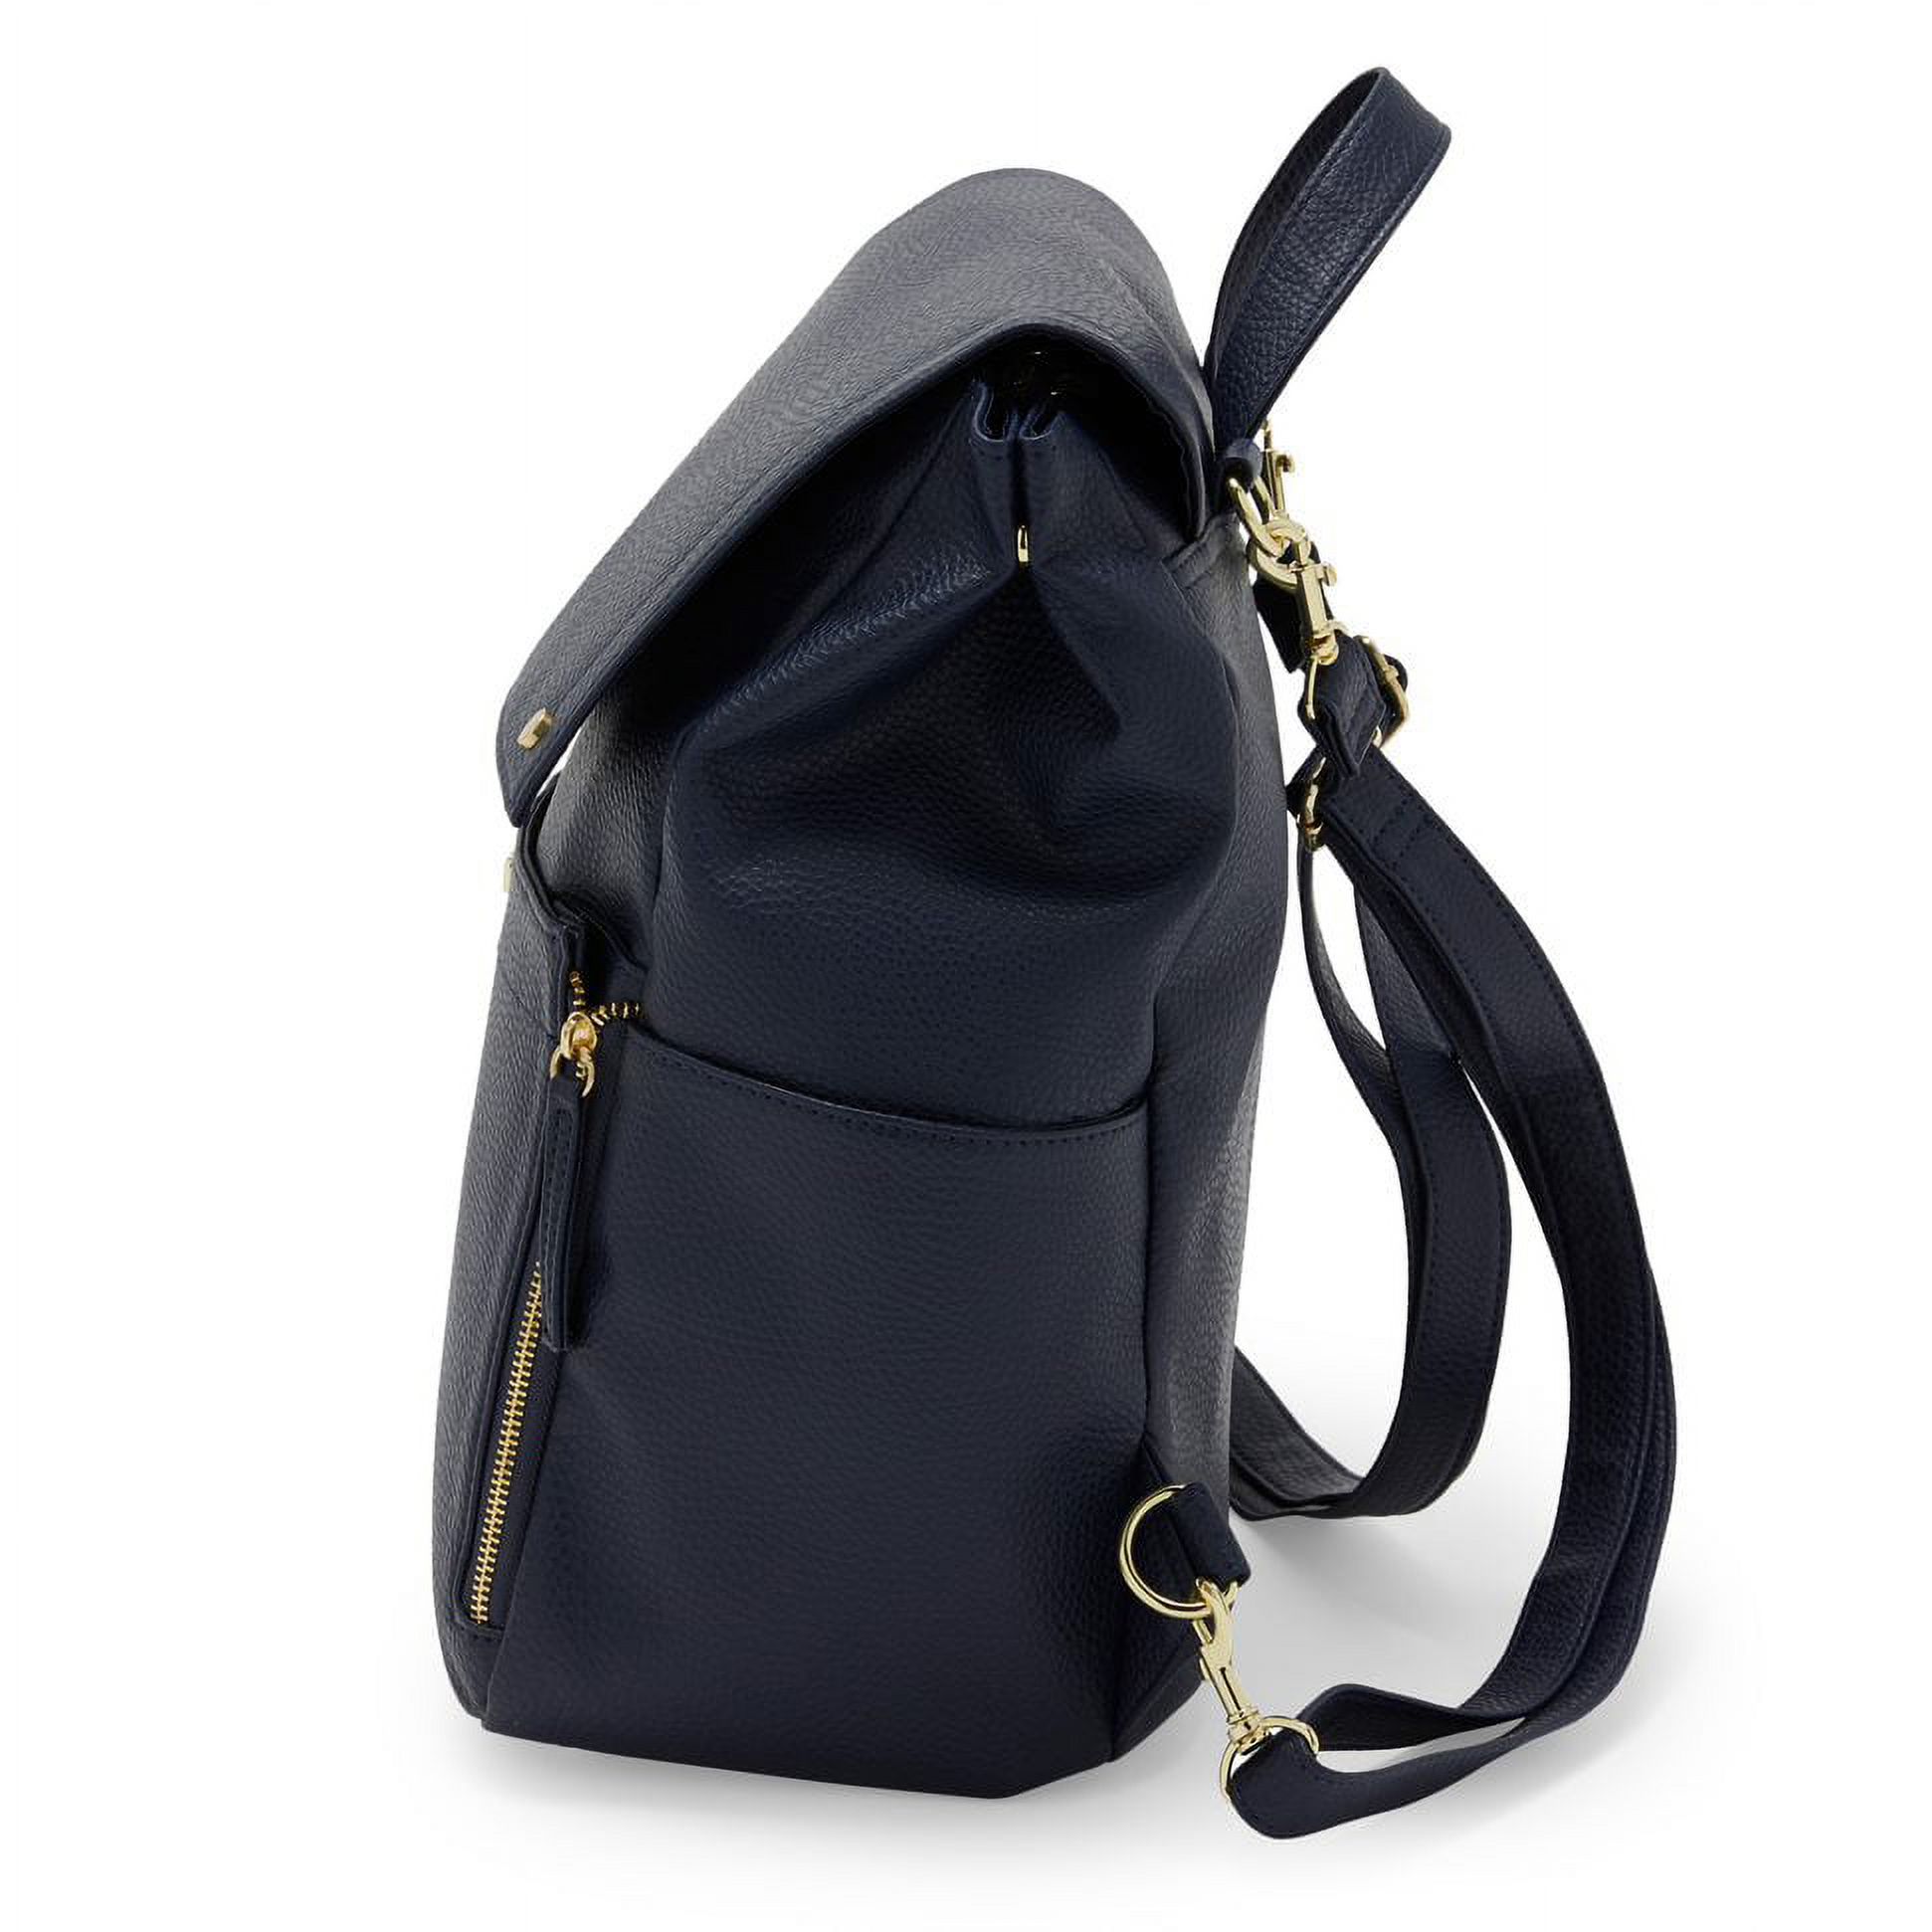 MoDRN Charli Diaper Bag in Navy, Convertible Backpack with Adjustable Straps - image 3 of 6